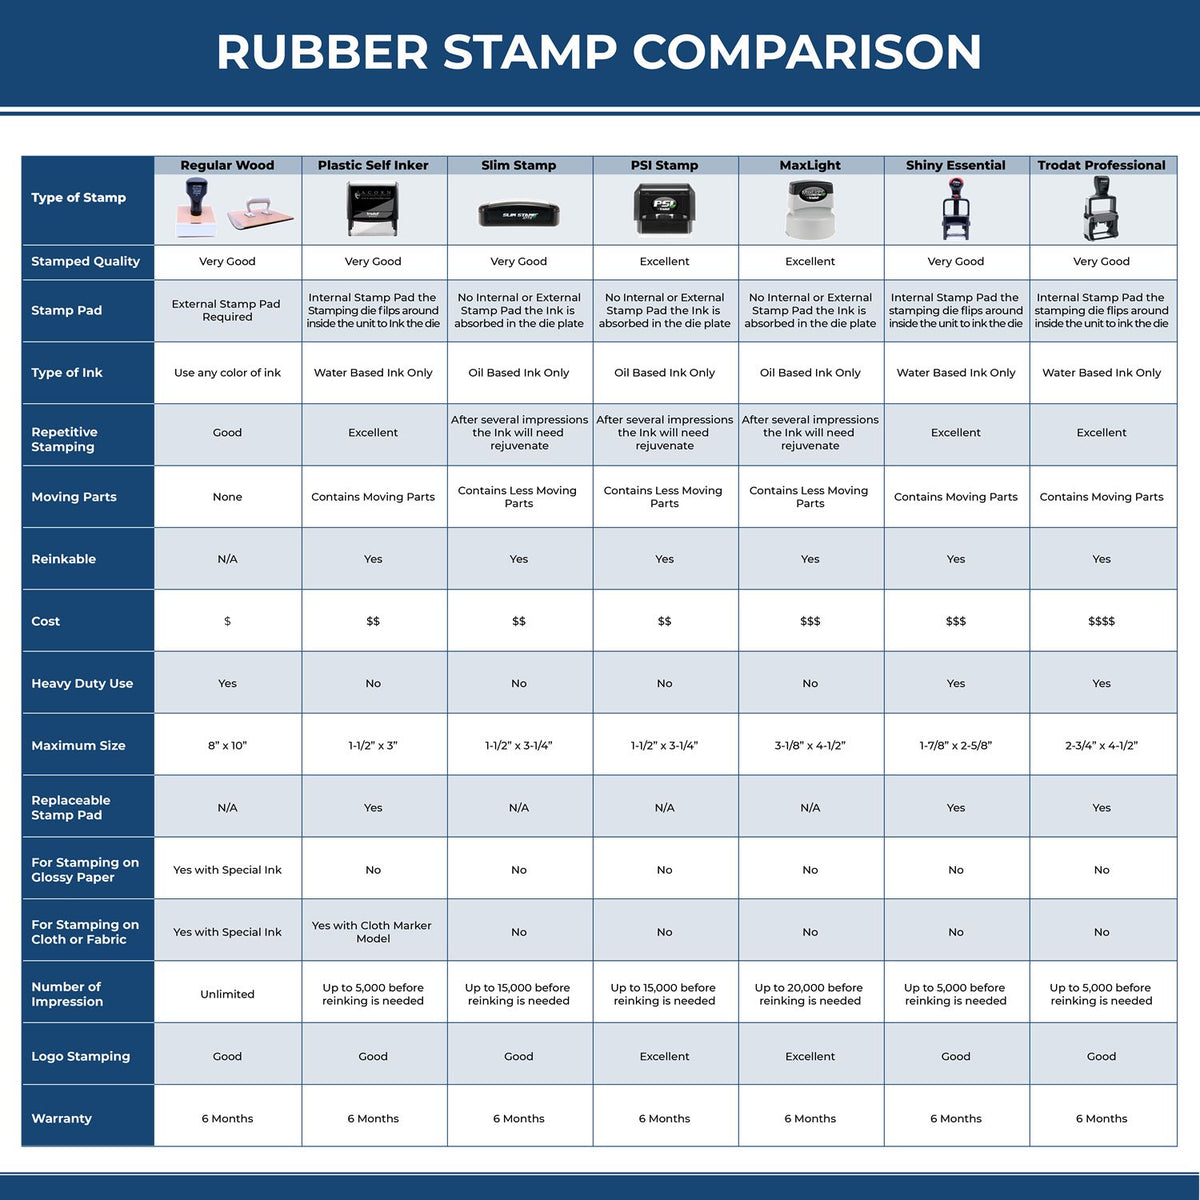 Large Too Social During Class Today Rubber Stamp 4695R Rubber Stamp Comparison